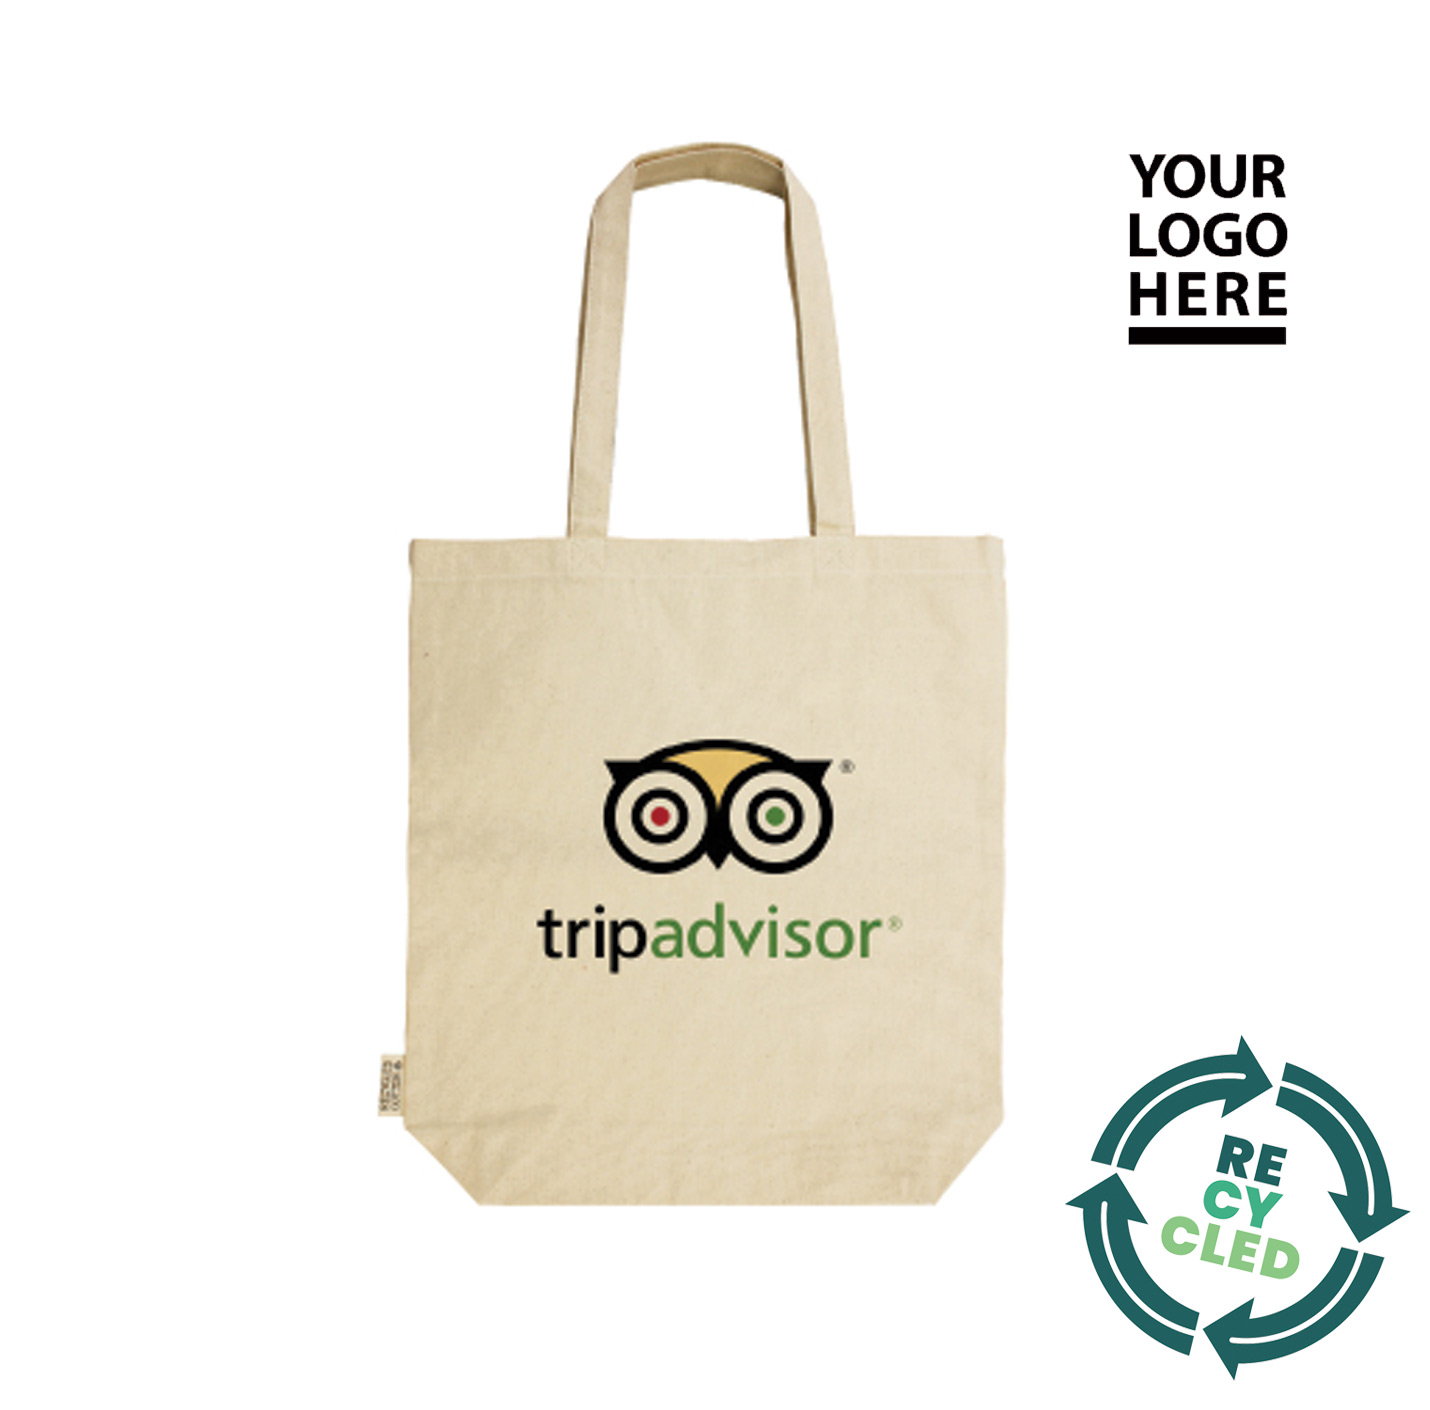 Recycled Cotton Canvas Bags with logo